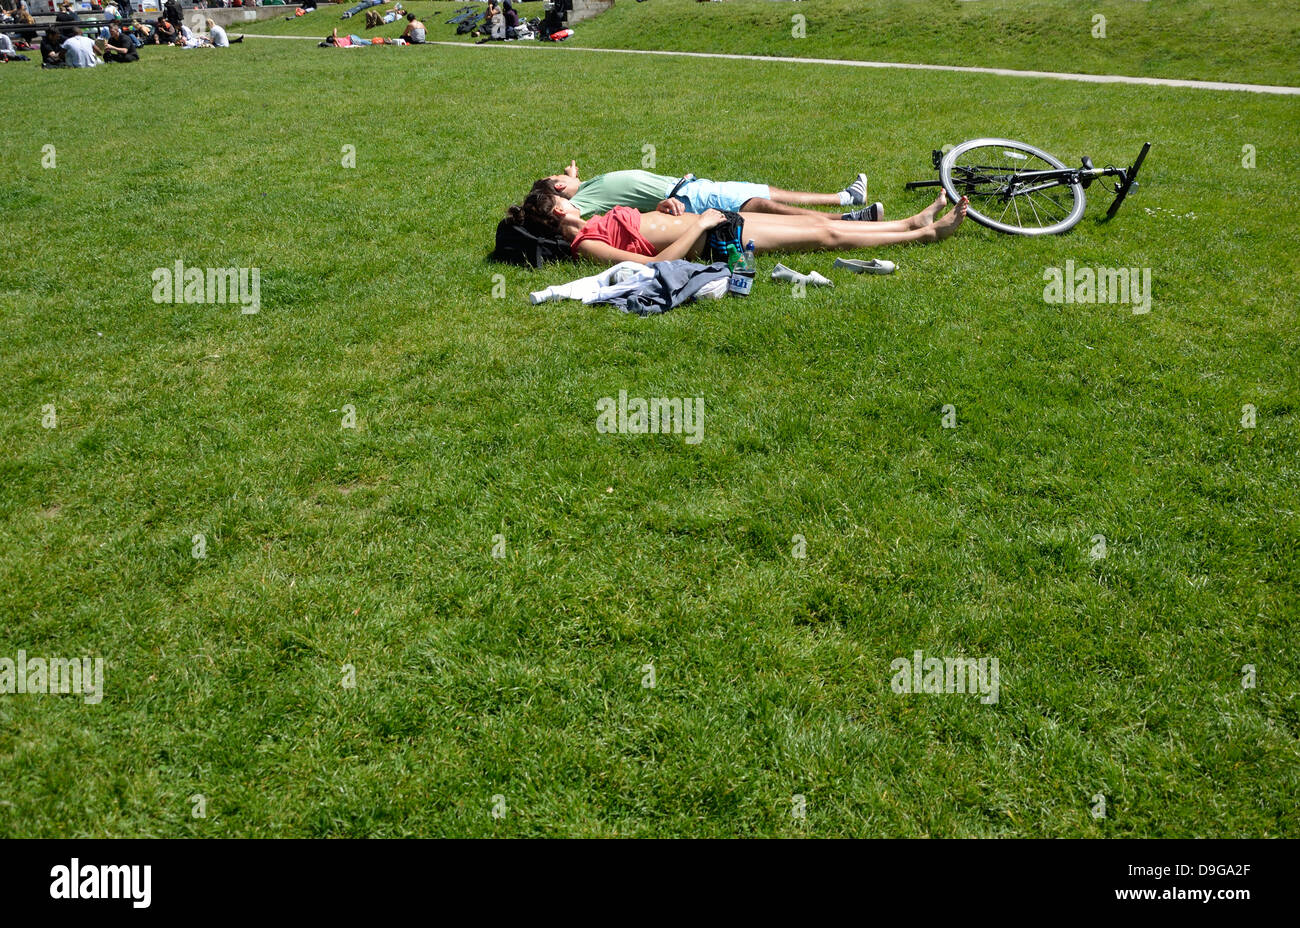 London, England, UK. Two young people sunbathing (near Marble Arch) Stock Photo